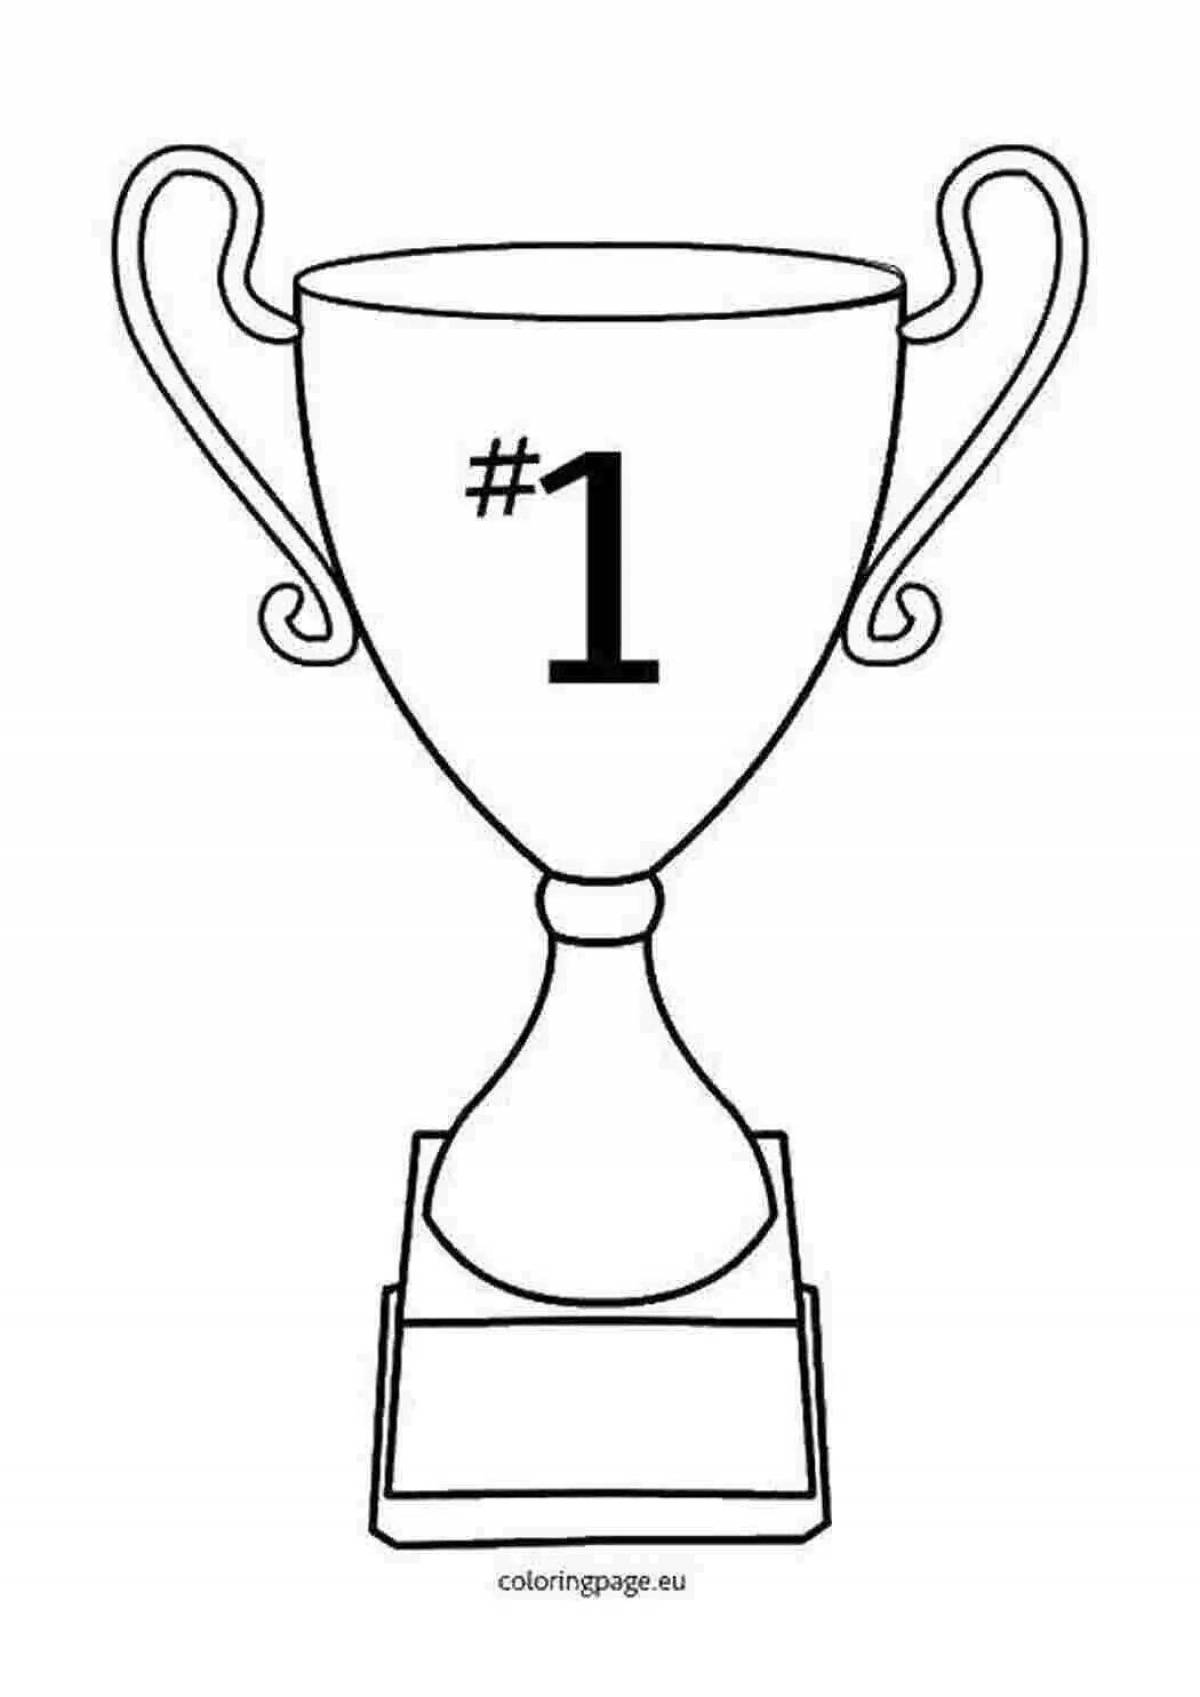 Impressive football cup coloring page